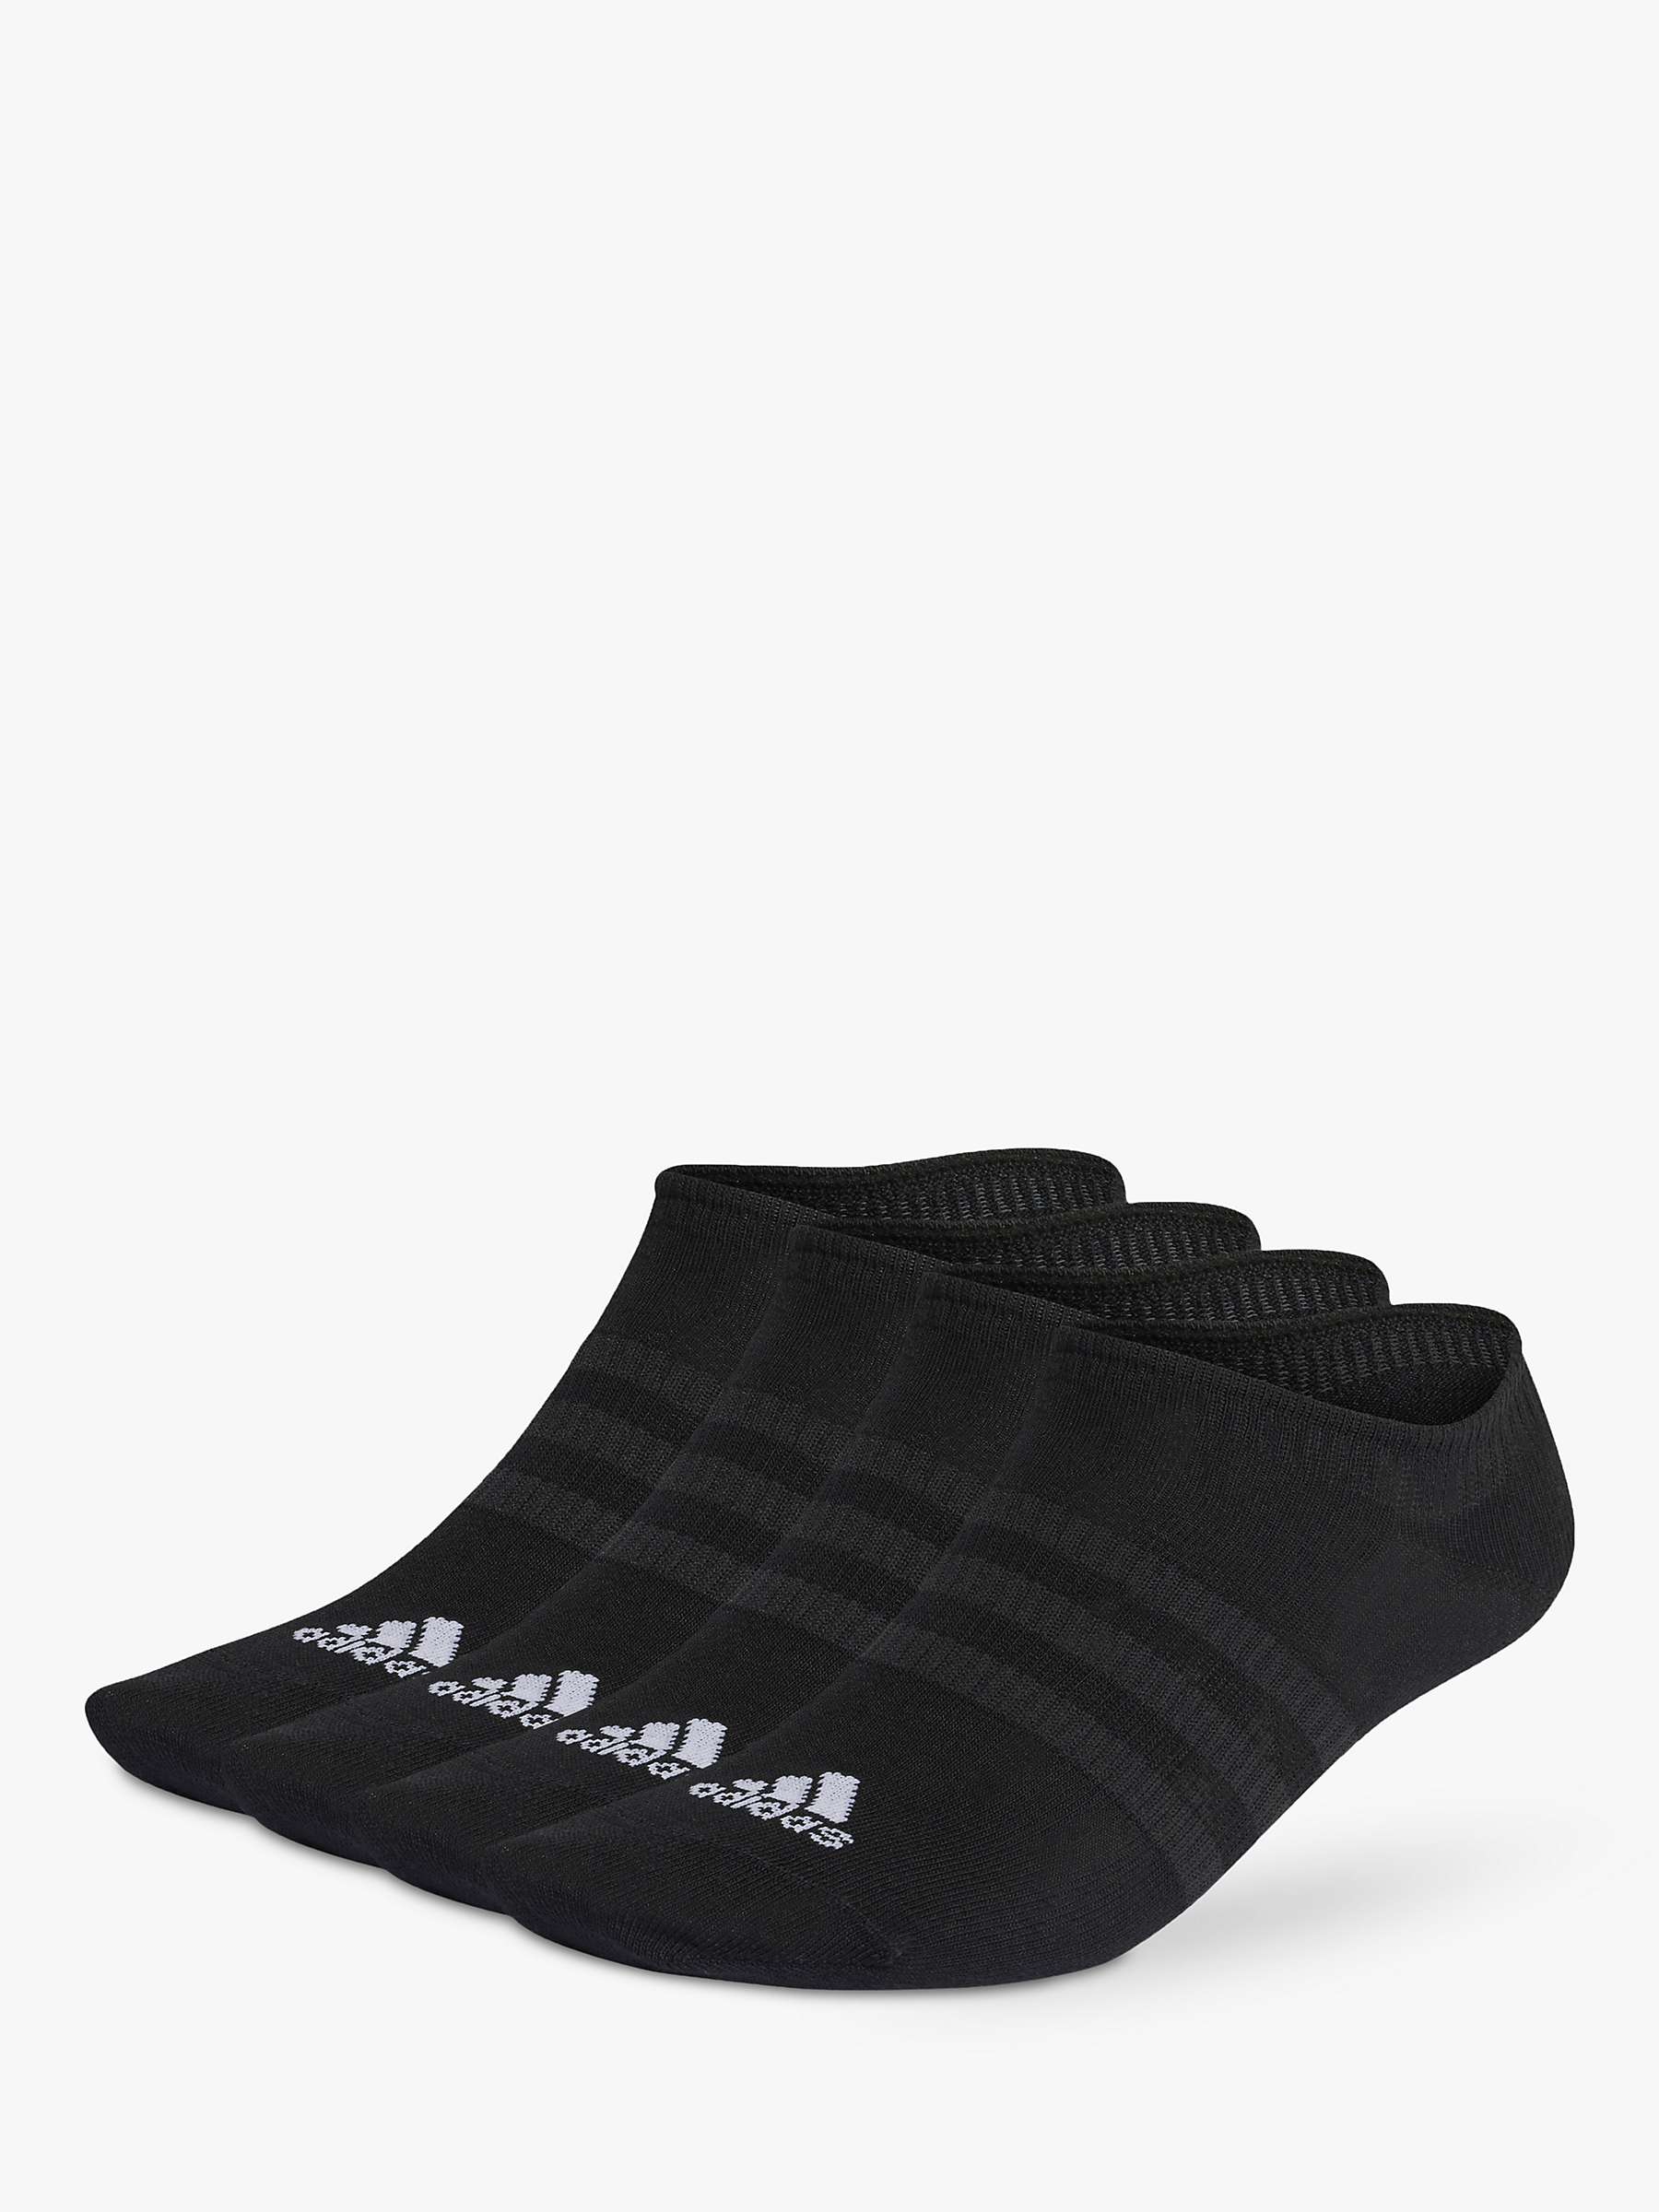 Buy adidas Thin and Light No-Show Socks, Pack of 3 Online at johnlewis.com